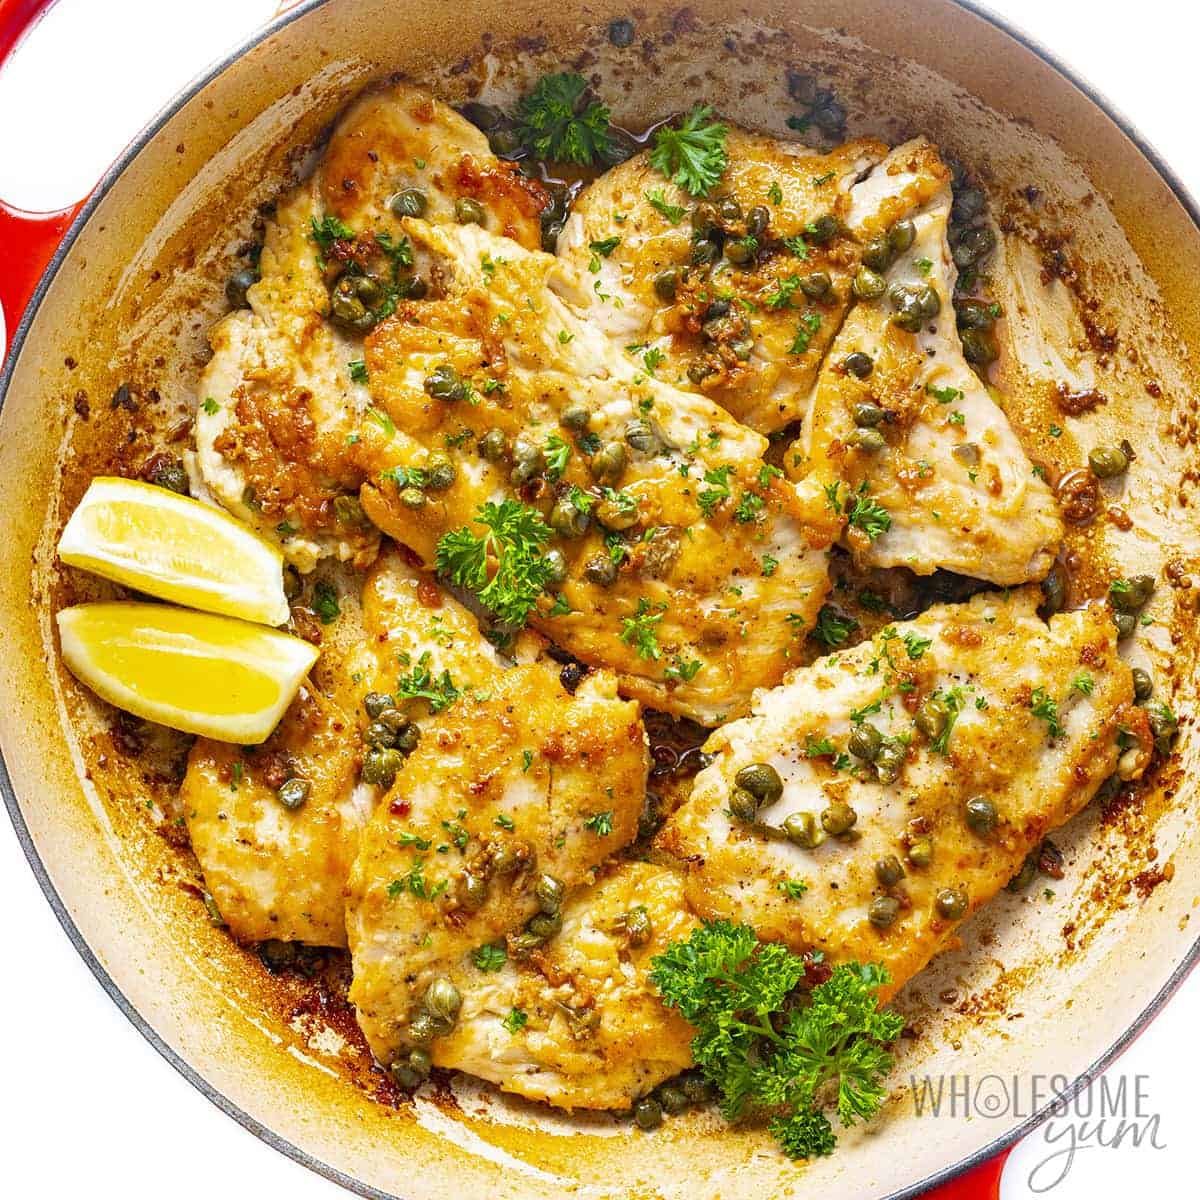 Finished chicken piccata recipe in pan with lemon.